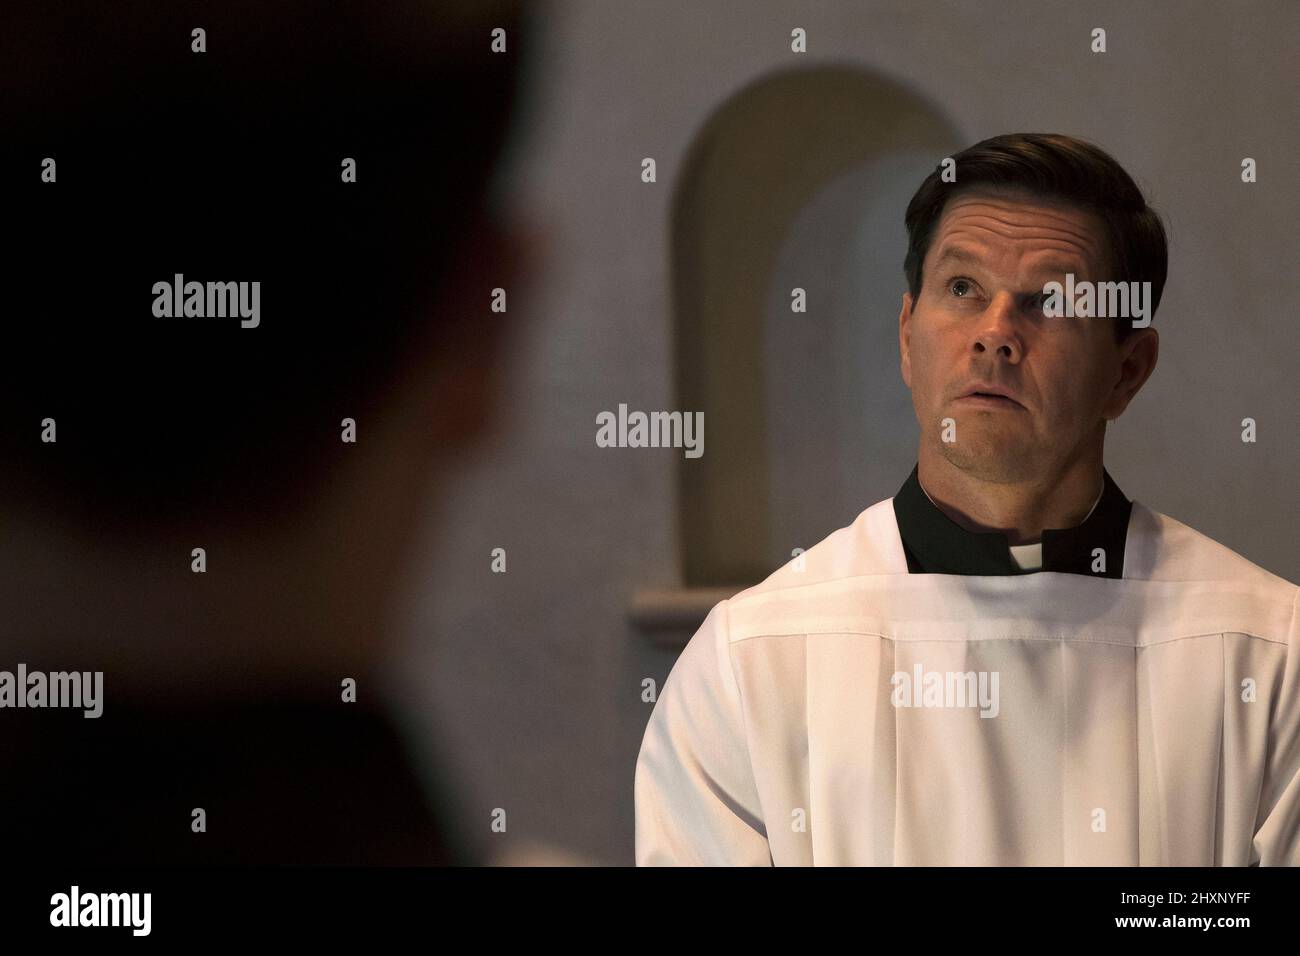 MARK WAHLBERG in FATHER STU (2022), directed by ROSALIND ROSS. Credit: Palm Drive Productions / Album Stock Photo